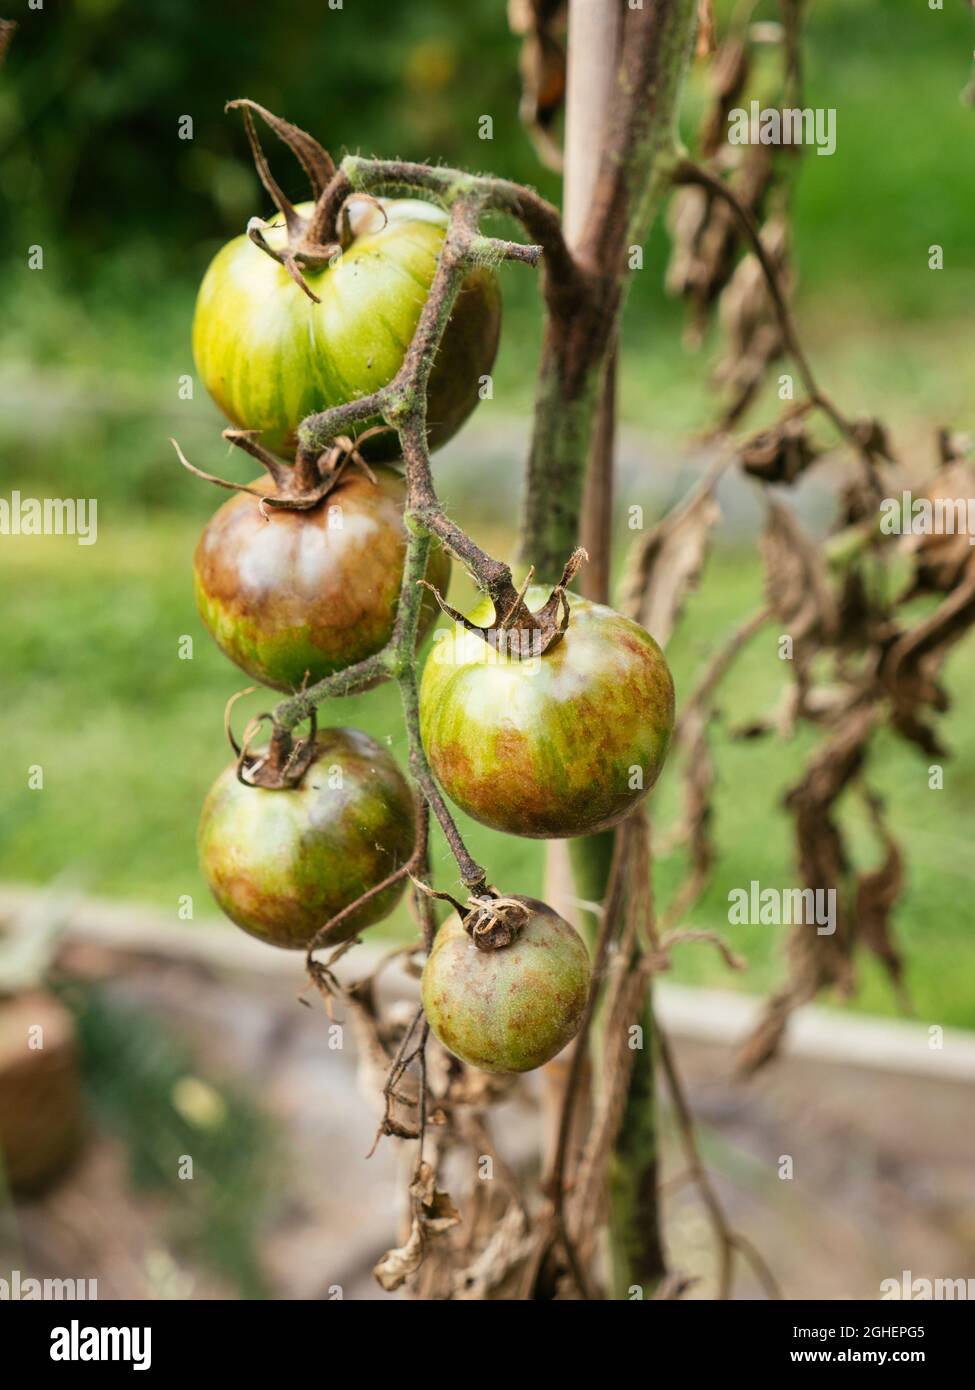 Tomato stem rot caused by the fungus  Didymella lycopersici and too much rain. Stock Photo